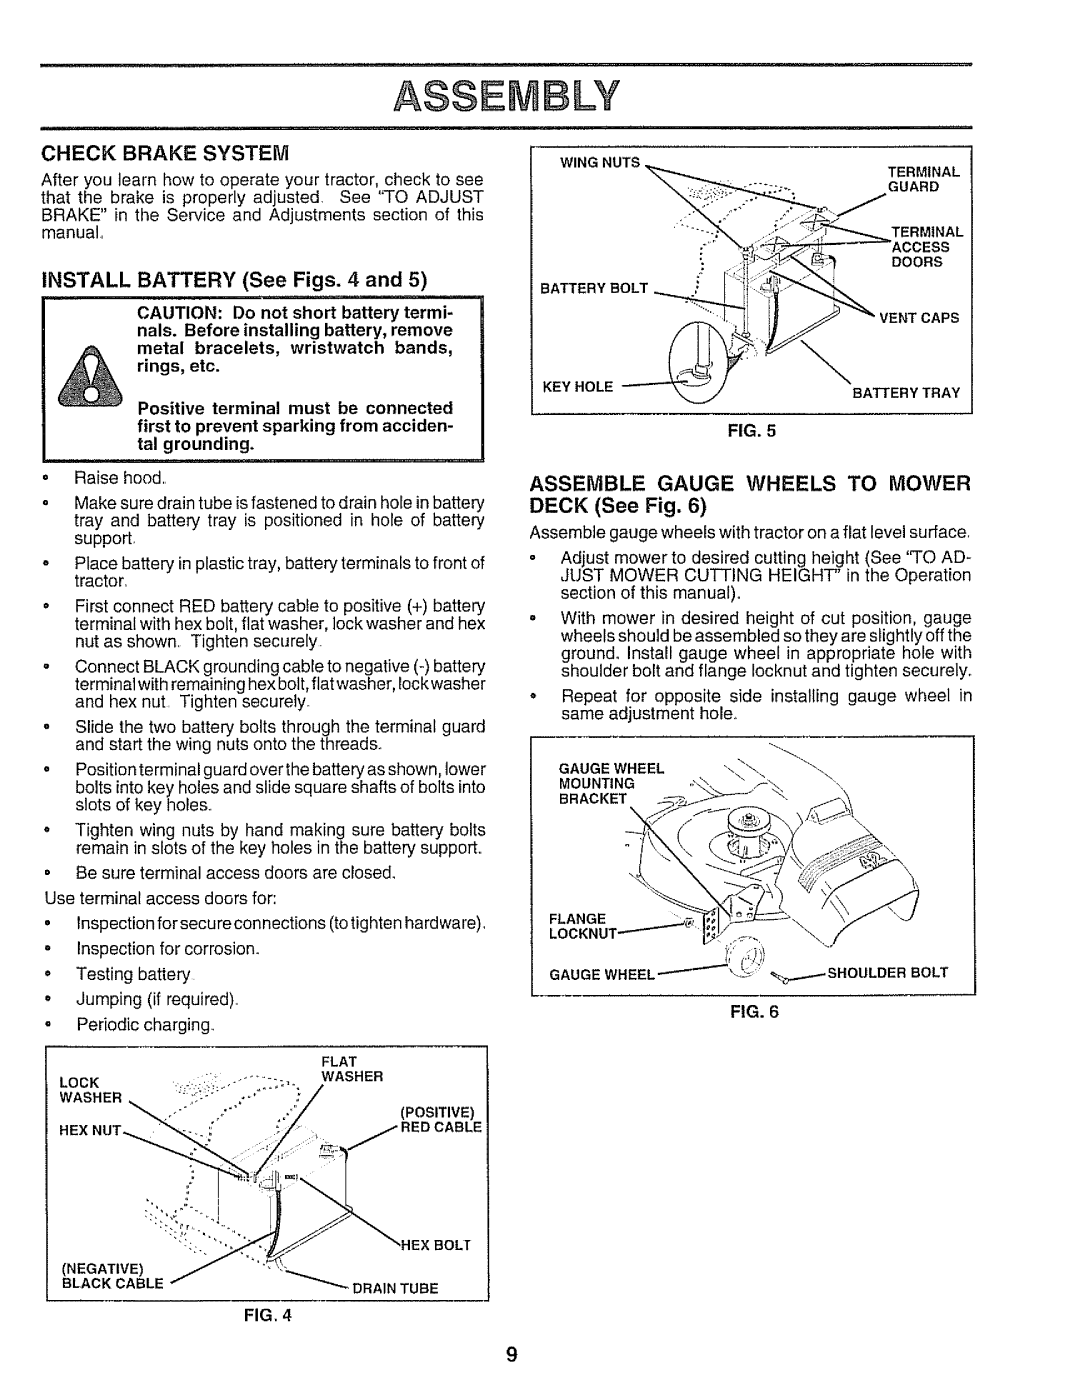 Sears 917.25545 owner manual Assembly, Check Brake System, INSTALL BATTERY See Figs. 4 and, Wingnuts, DECK See Fig 